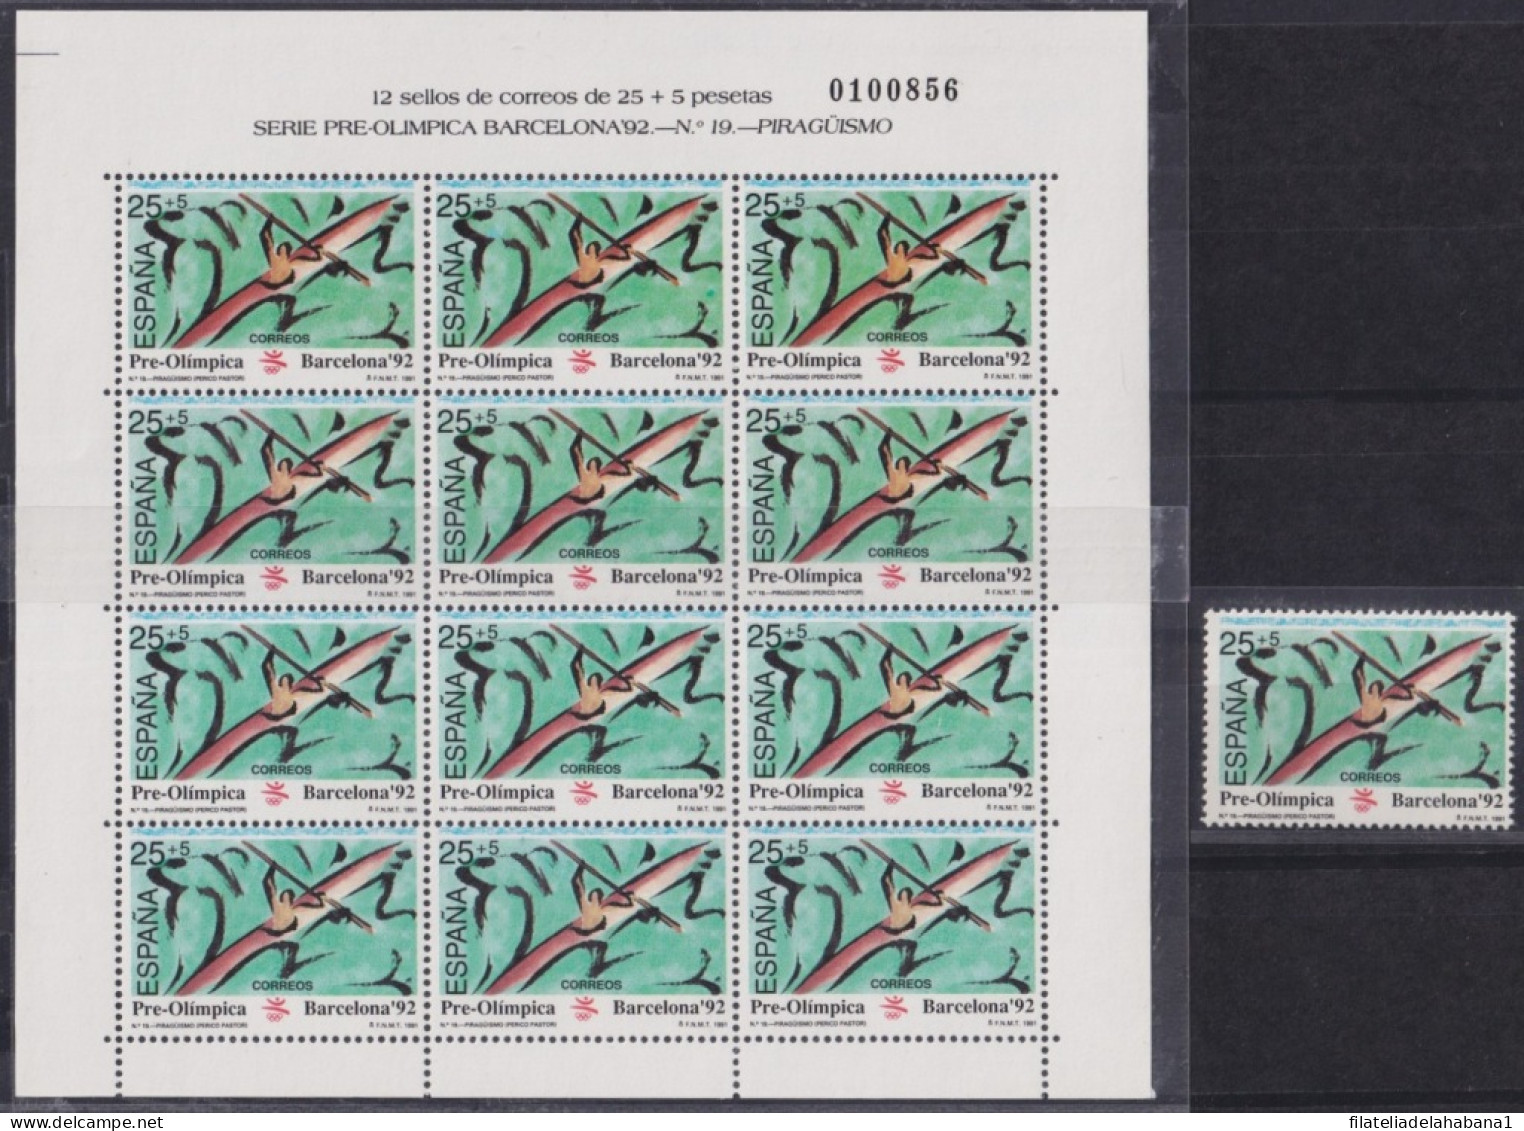 F-EX49325 SPAIN ESPAÑA MNH 1991 OLYMPIC GAMES BARCELONA CANOES PIRAGUISMO SHEET.  - Ete 1992: Barcelone